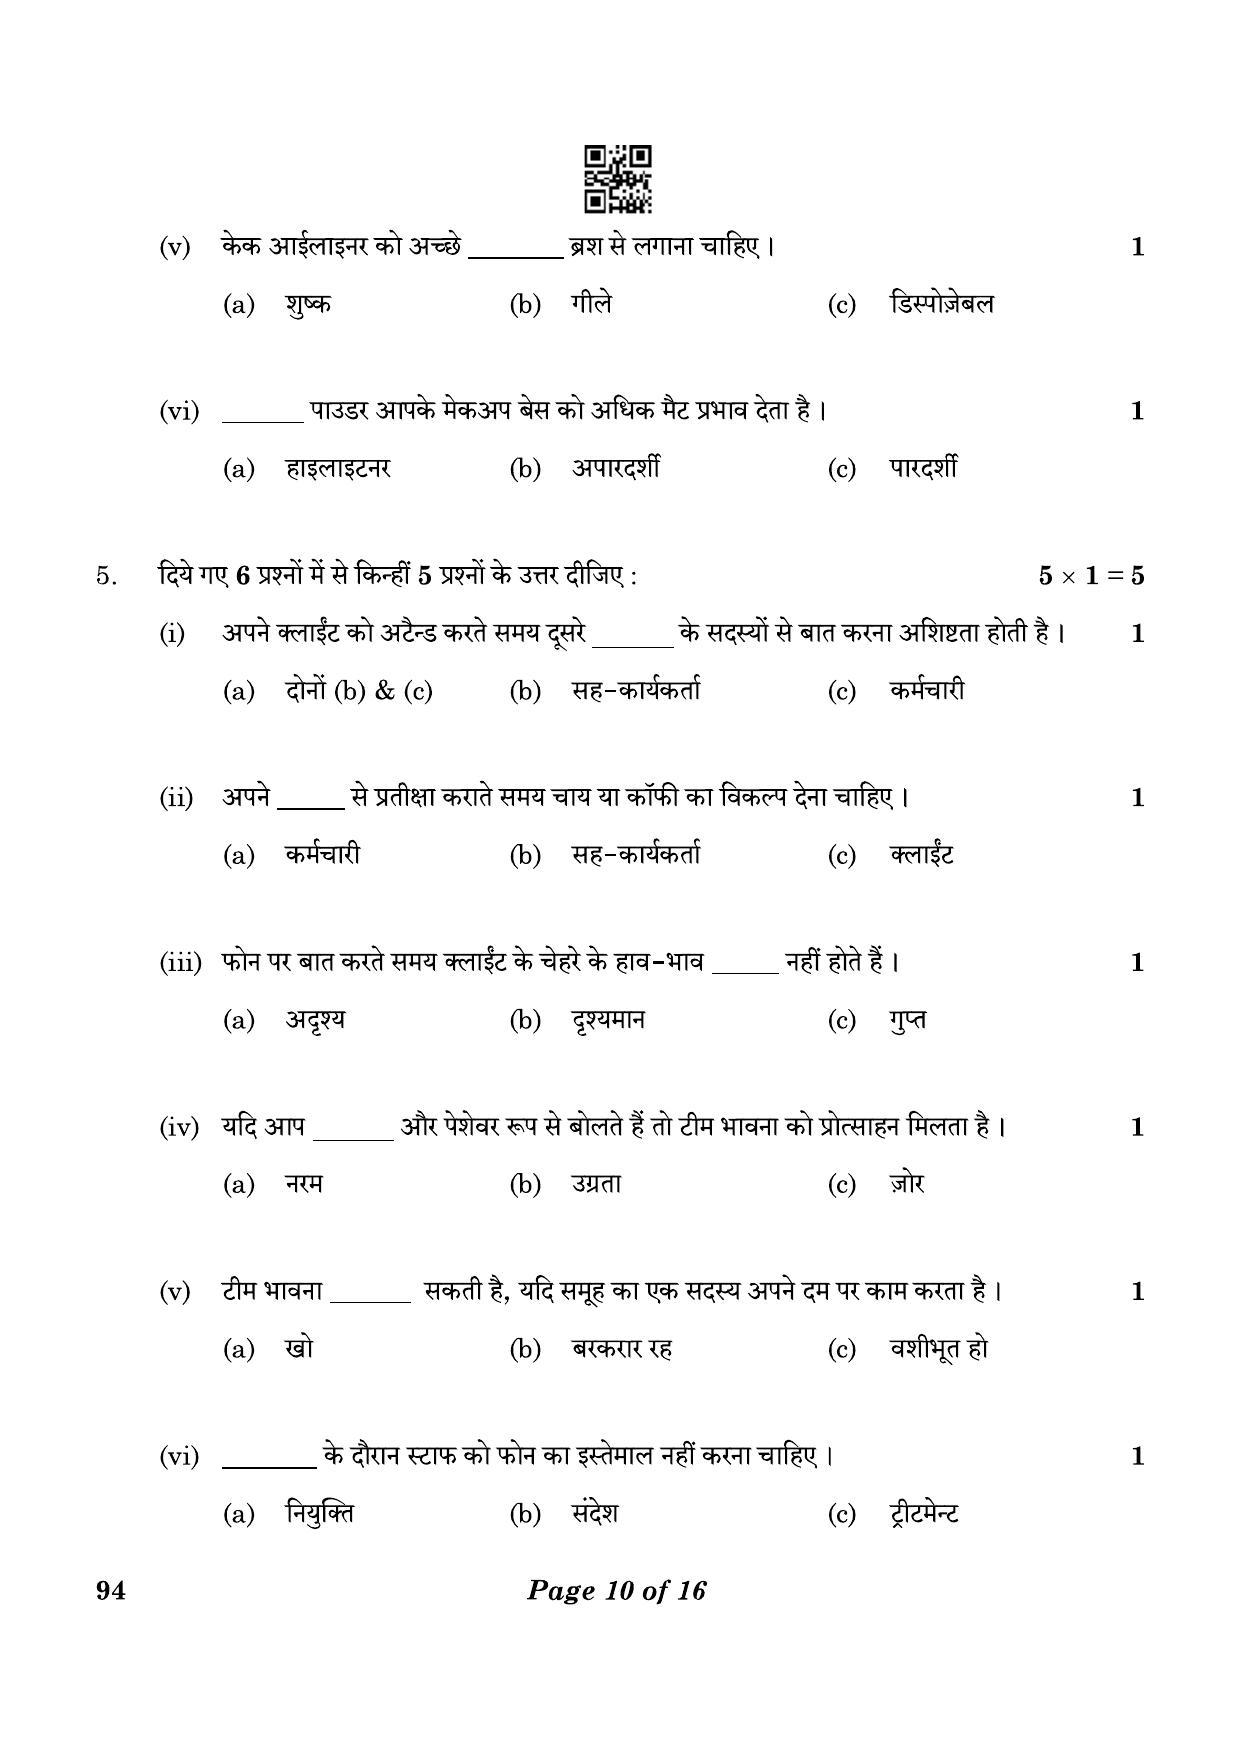 CBSE Class 10 94 Beauty And Wellness 2023 Question Paper - Page 10